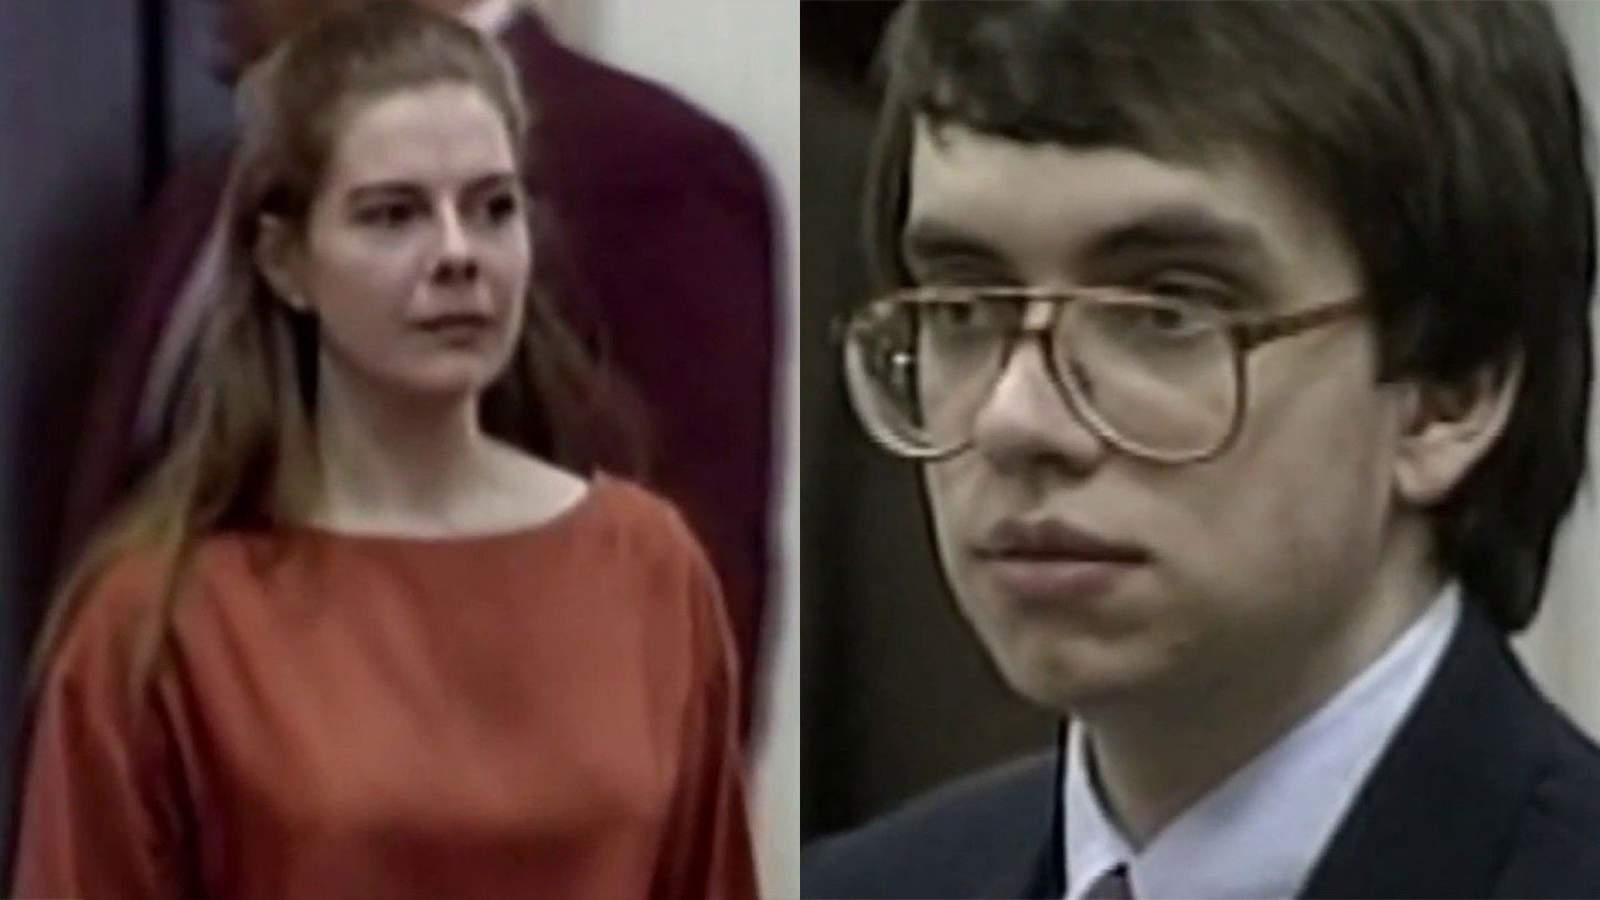 ‘I was very disappointed:’ Lead investigator breaks silence three decades later as Jens Soering, Elizabeth Haysom granted parole